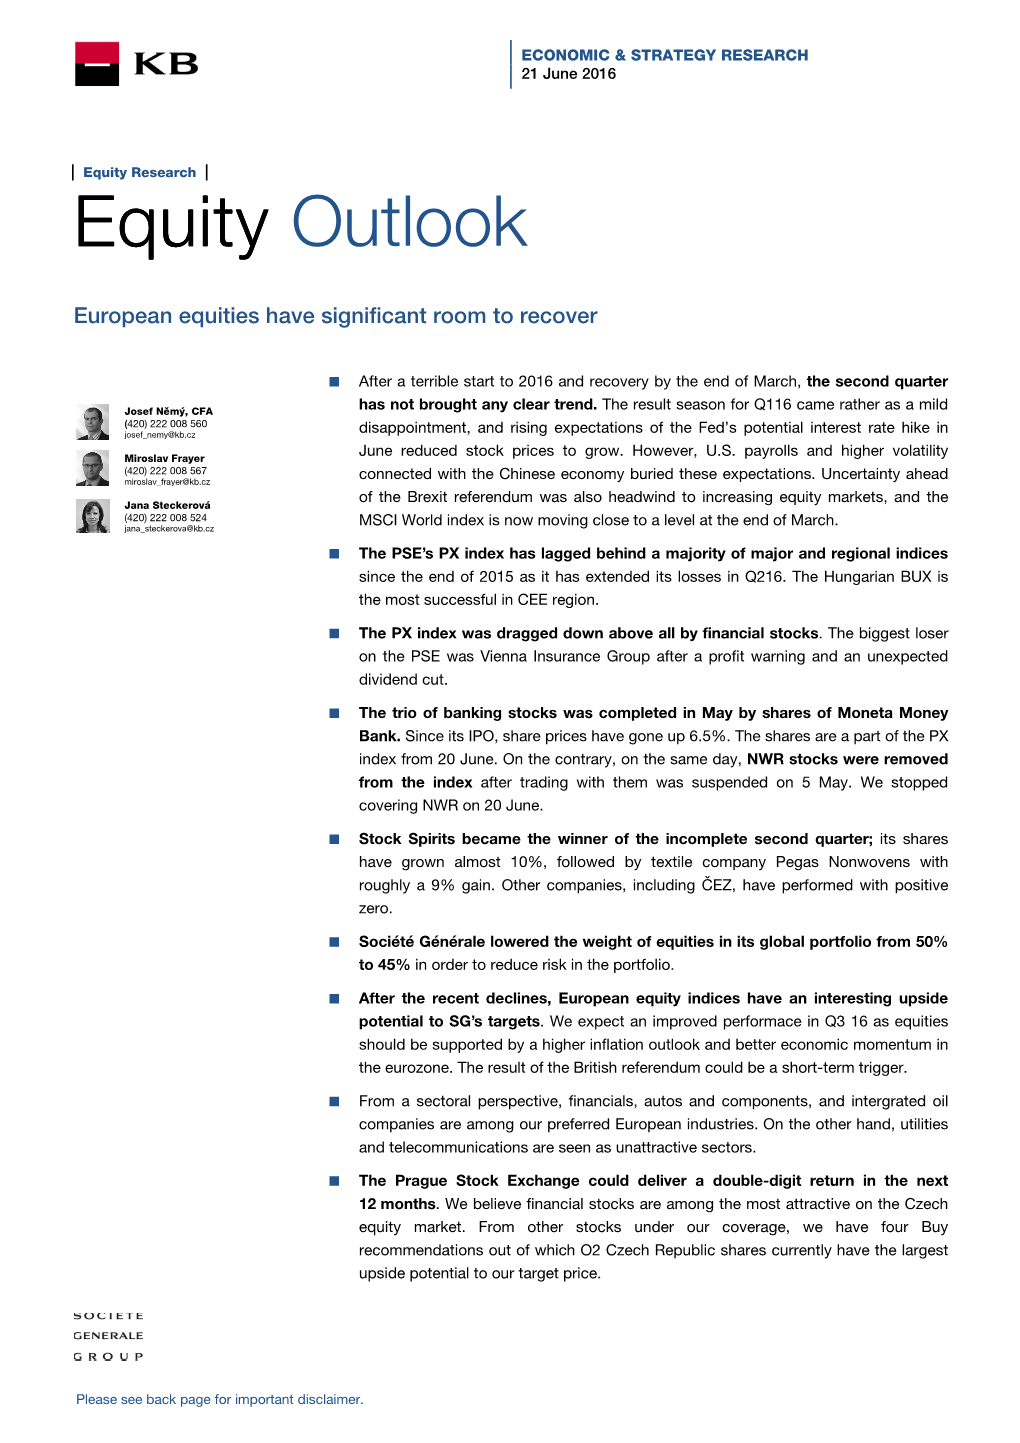 Equity Outlook